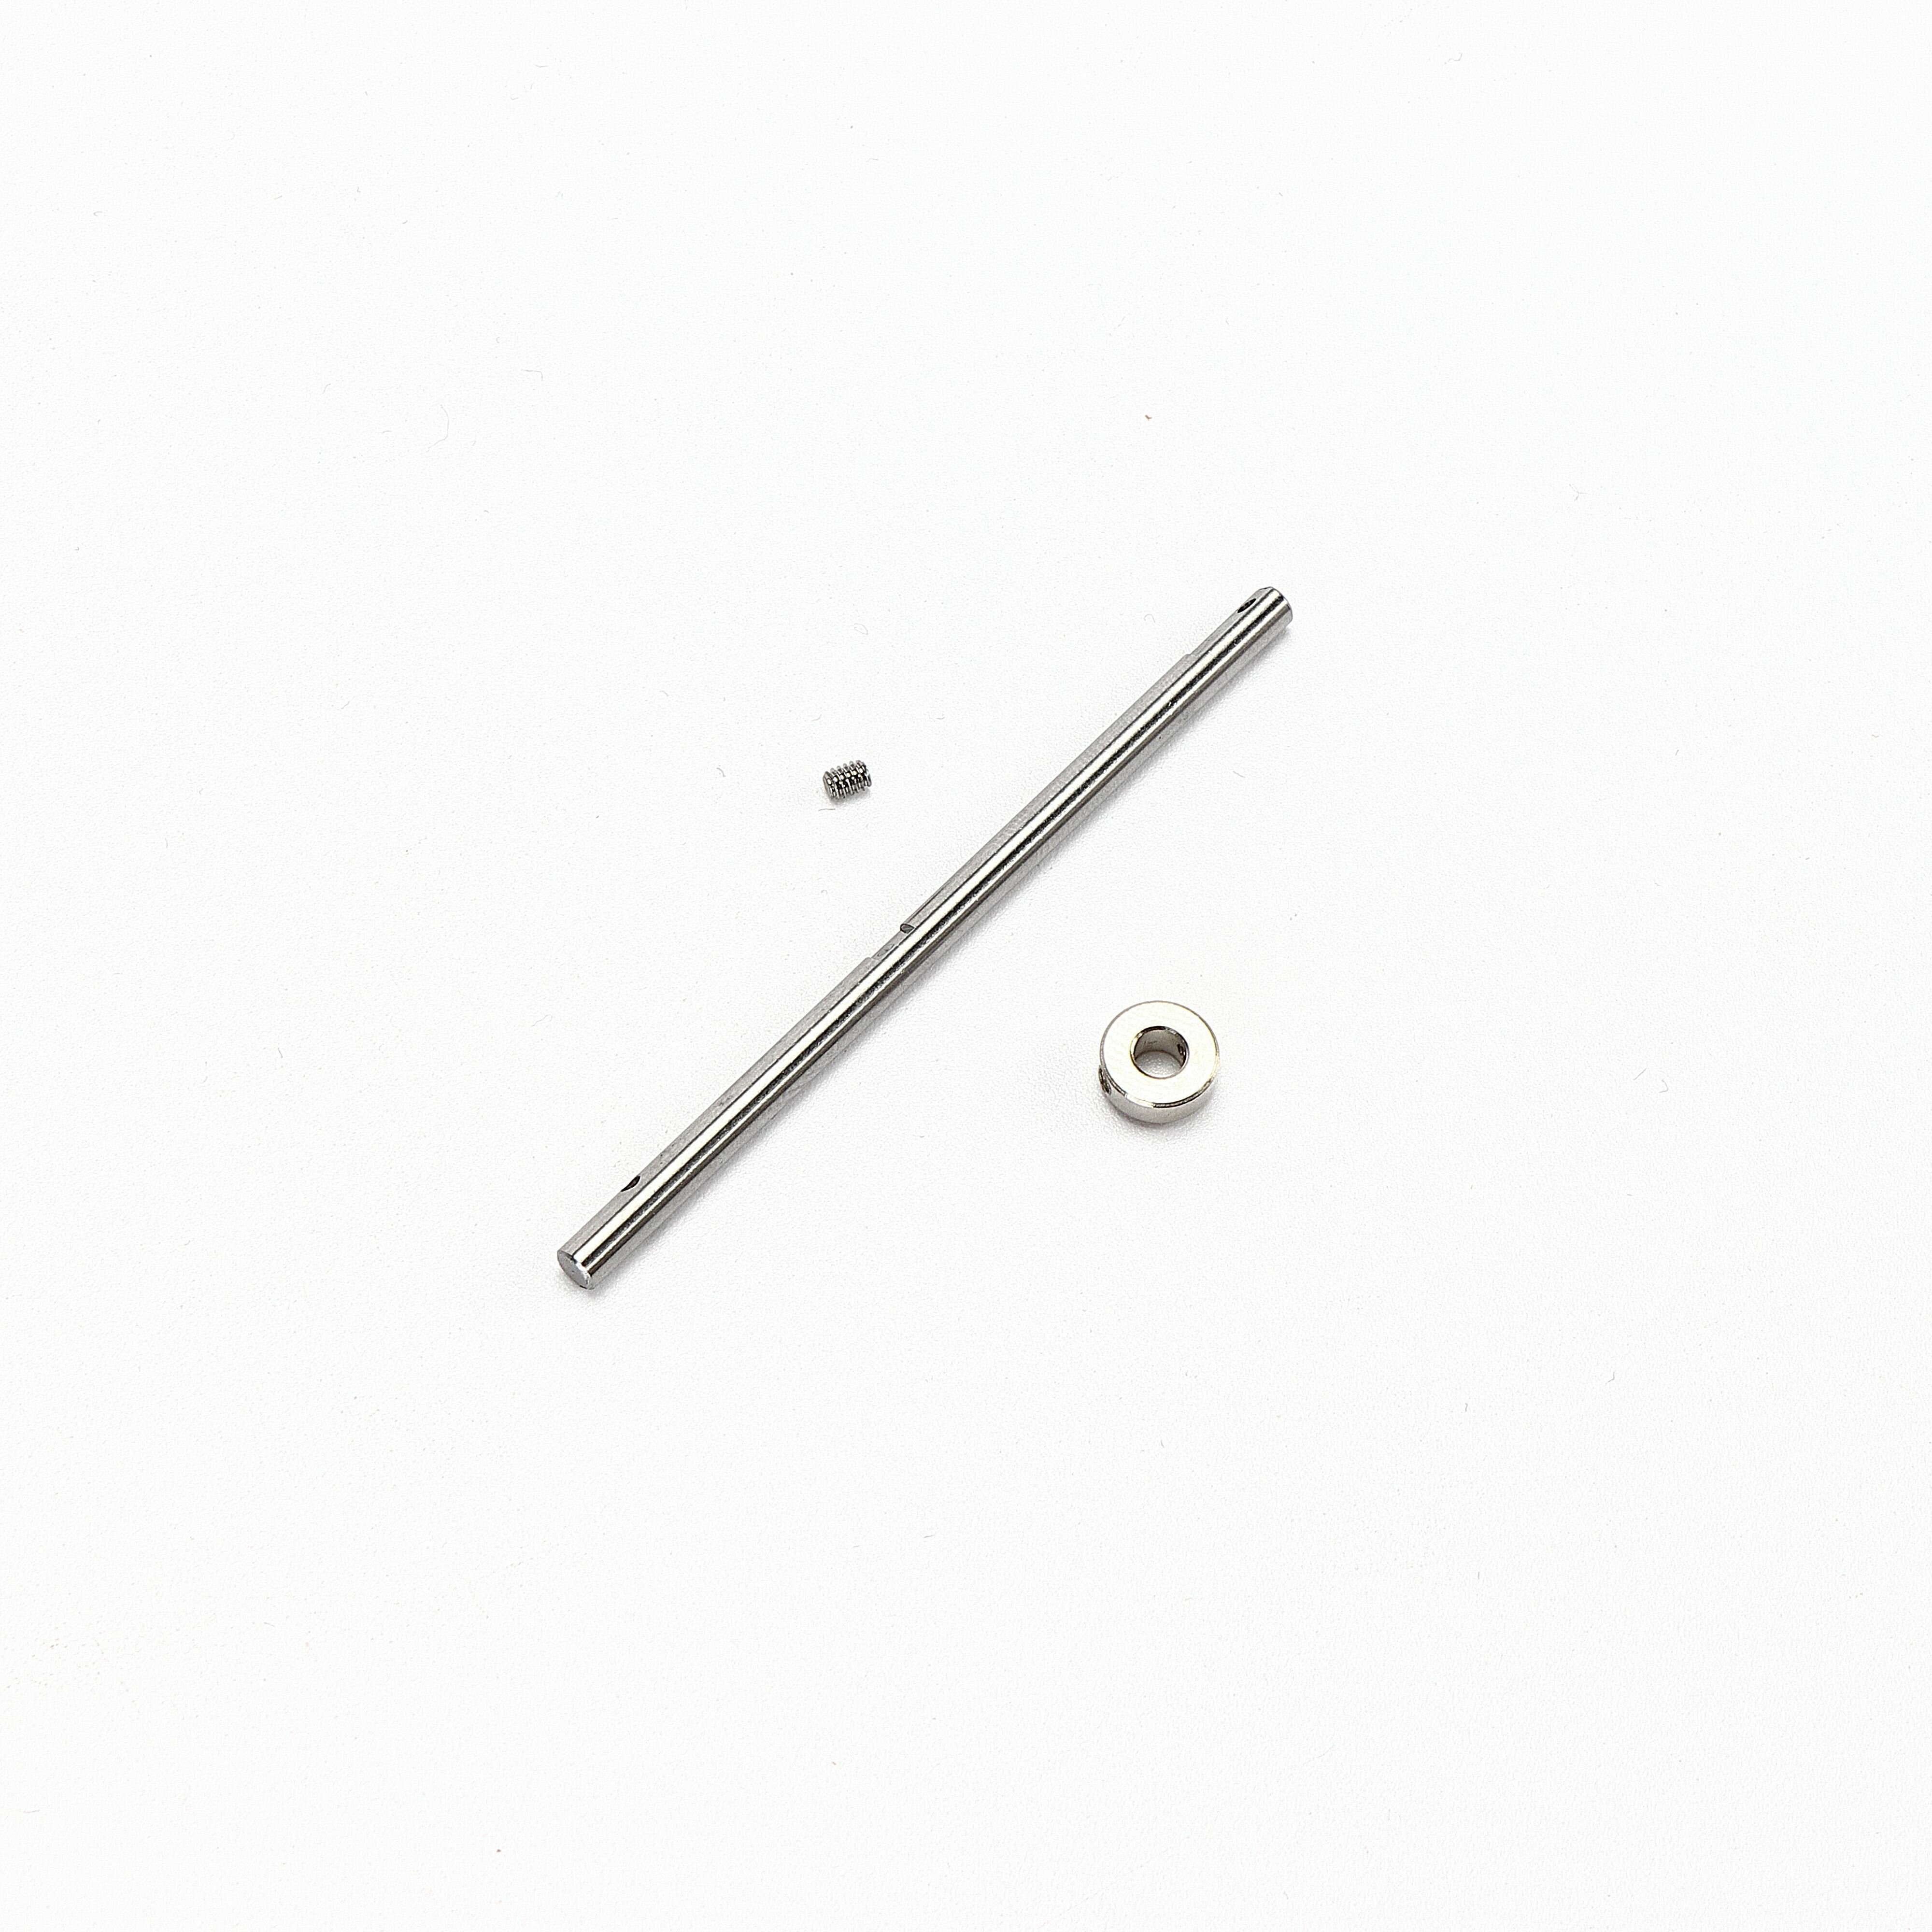 Eachine E130 RC Helicopter Spare Parts Main Shaft